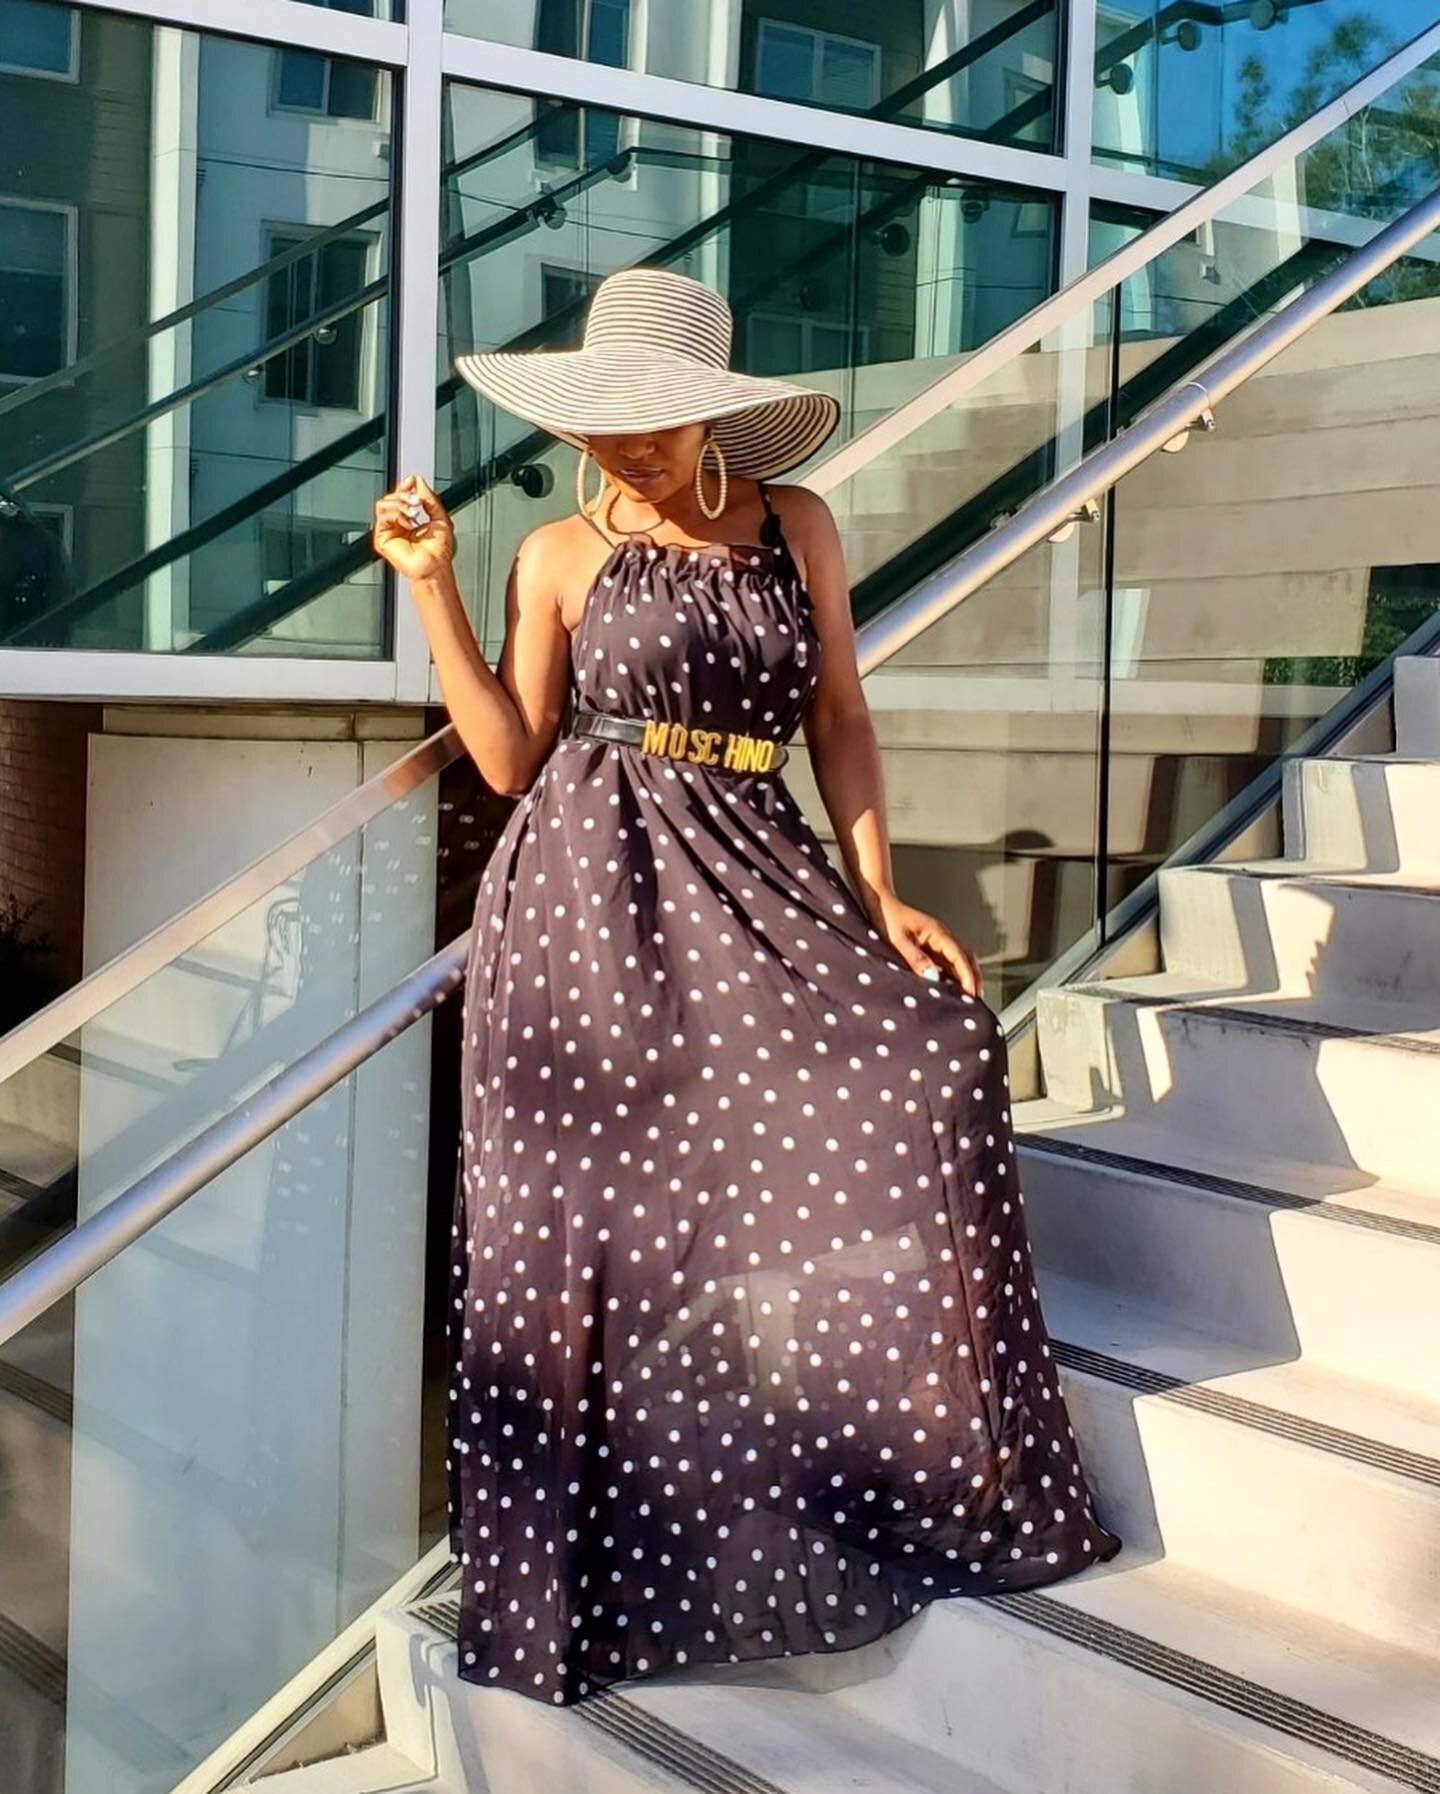 Polka Dots are timeless and stylishly flattering. The ZENA FASHIONS Chiffon Polka Dot dress will quickly become your favorite.

A freestyle dress that will keep giving. No zipper or buttons on this dress. Neckline of this simple chic dress has adjust